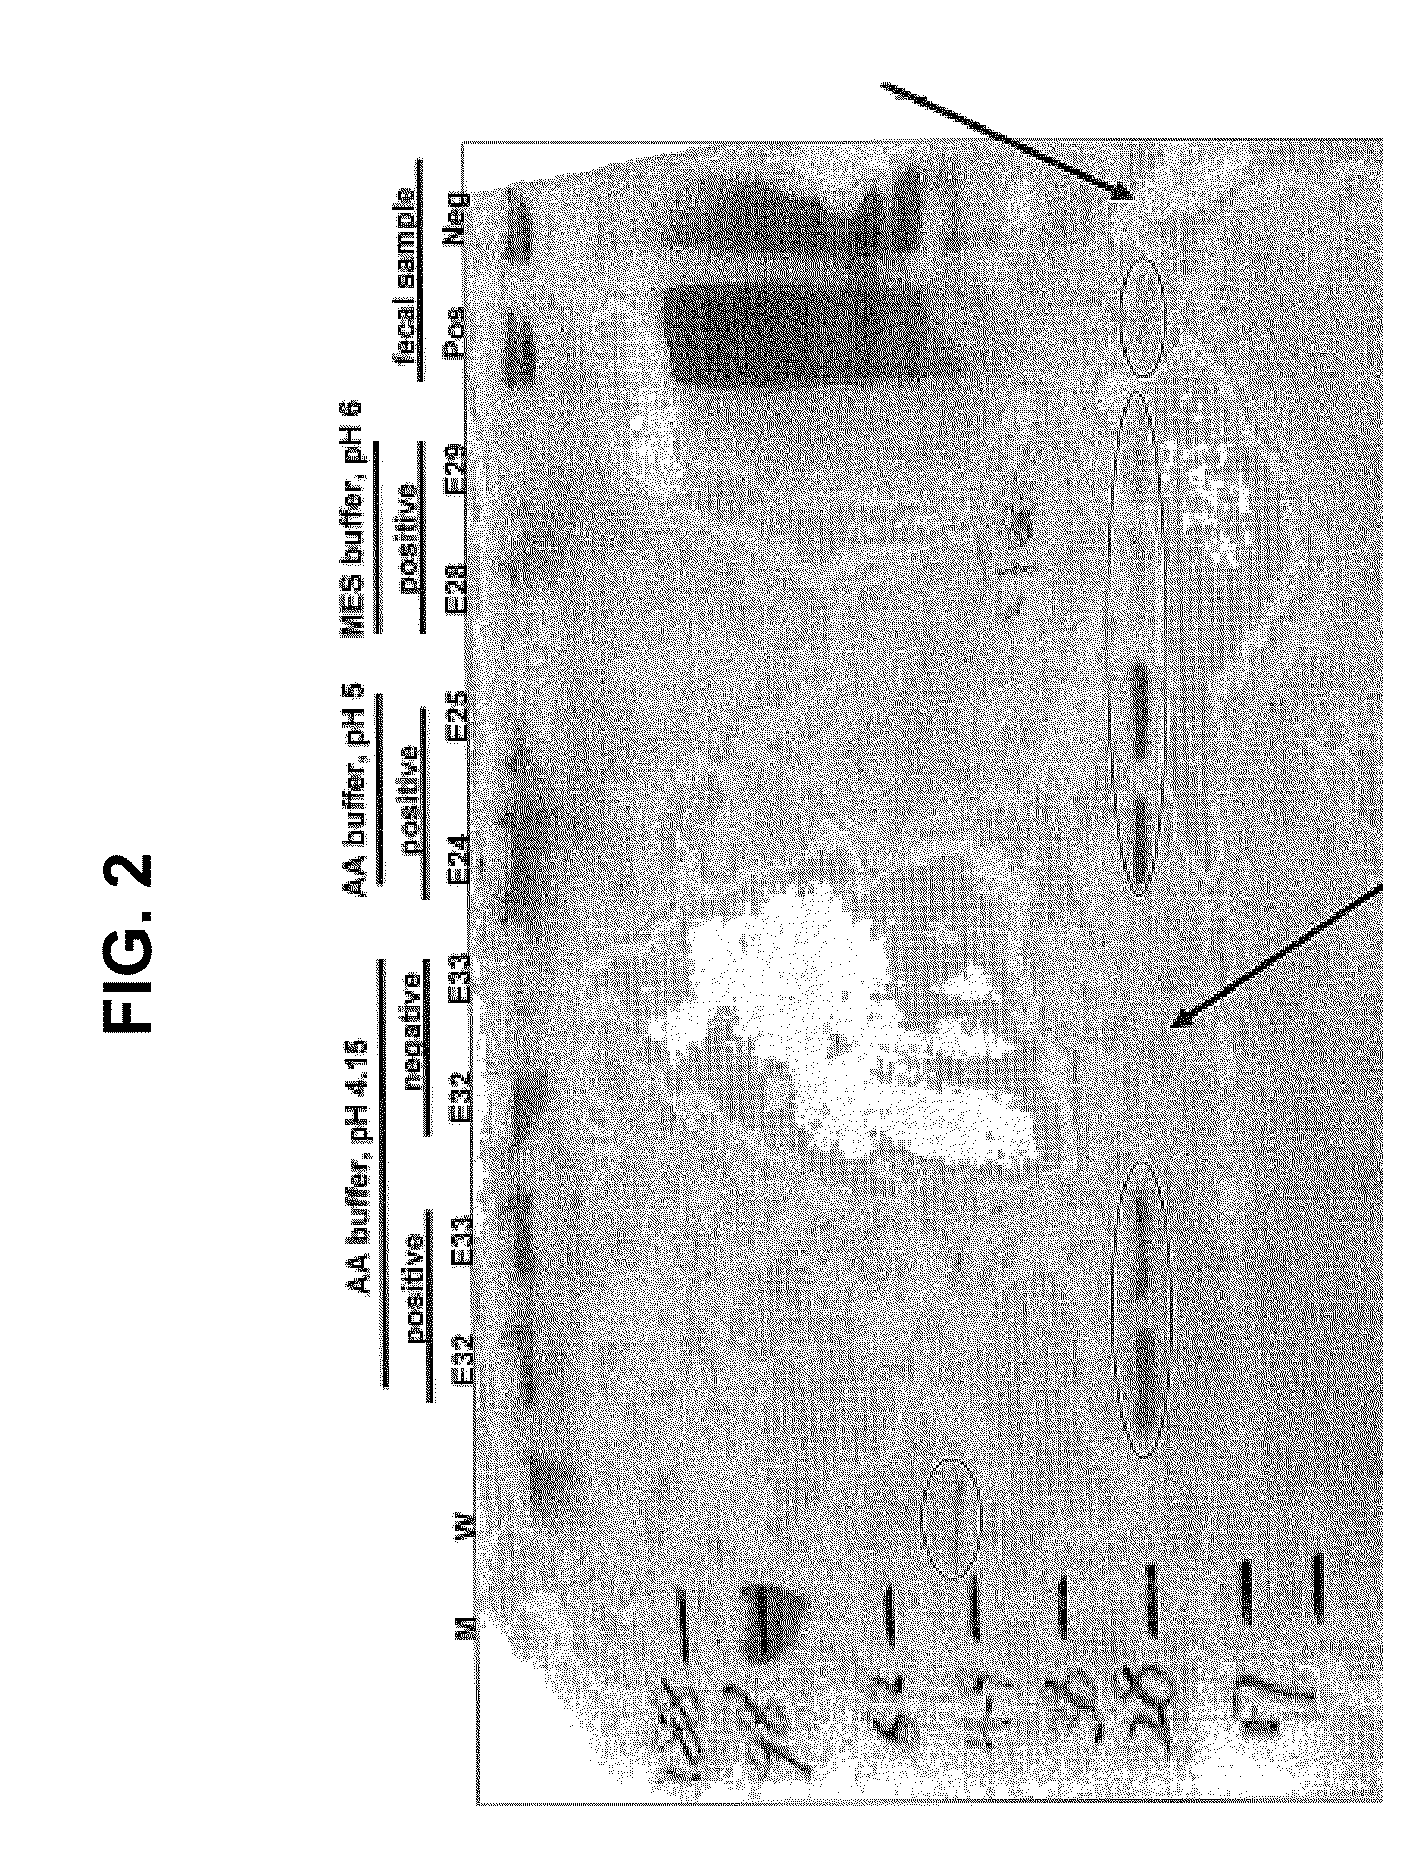 Compositions, devices, kits and methods for detecting hookworm